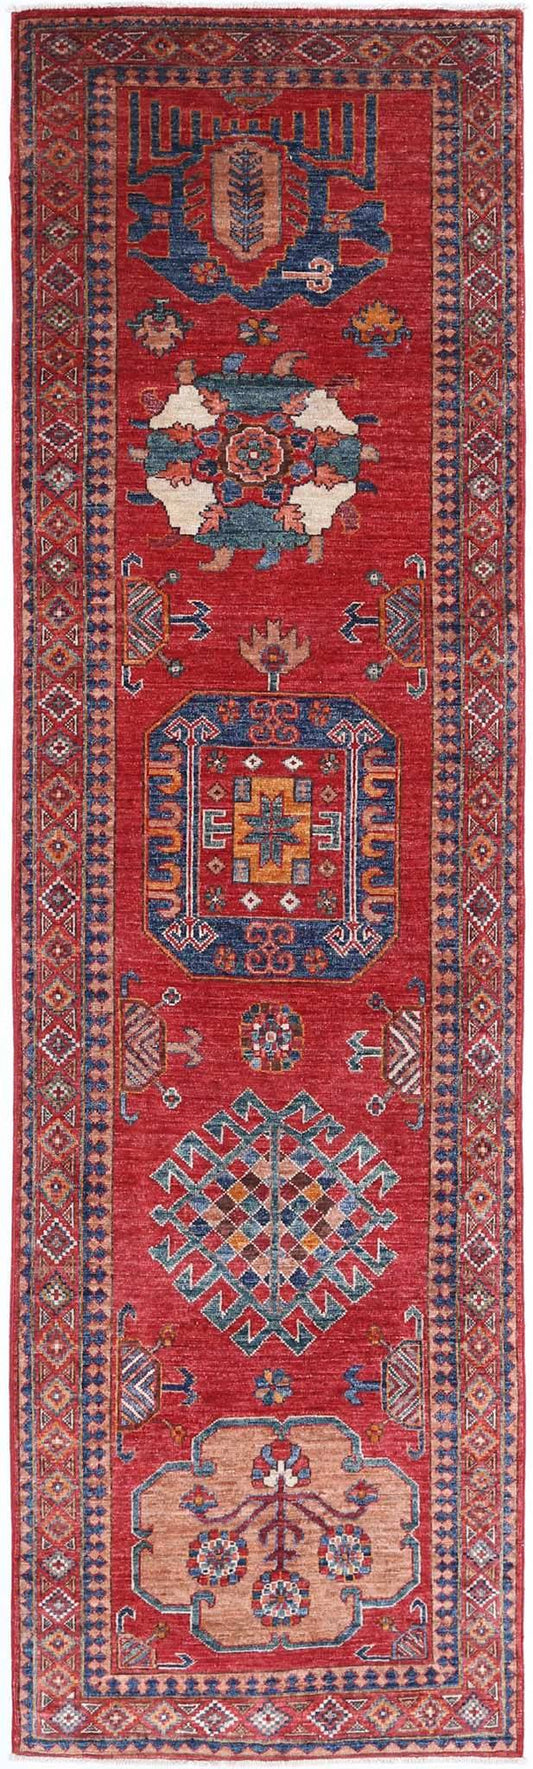 Tribal Hand Knotted Humna Humna Wool Rug of Size 2'8'' X 9'11'' in Red and Taupe Colors - Made in Afghanistan